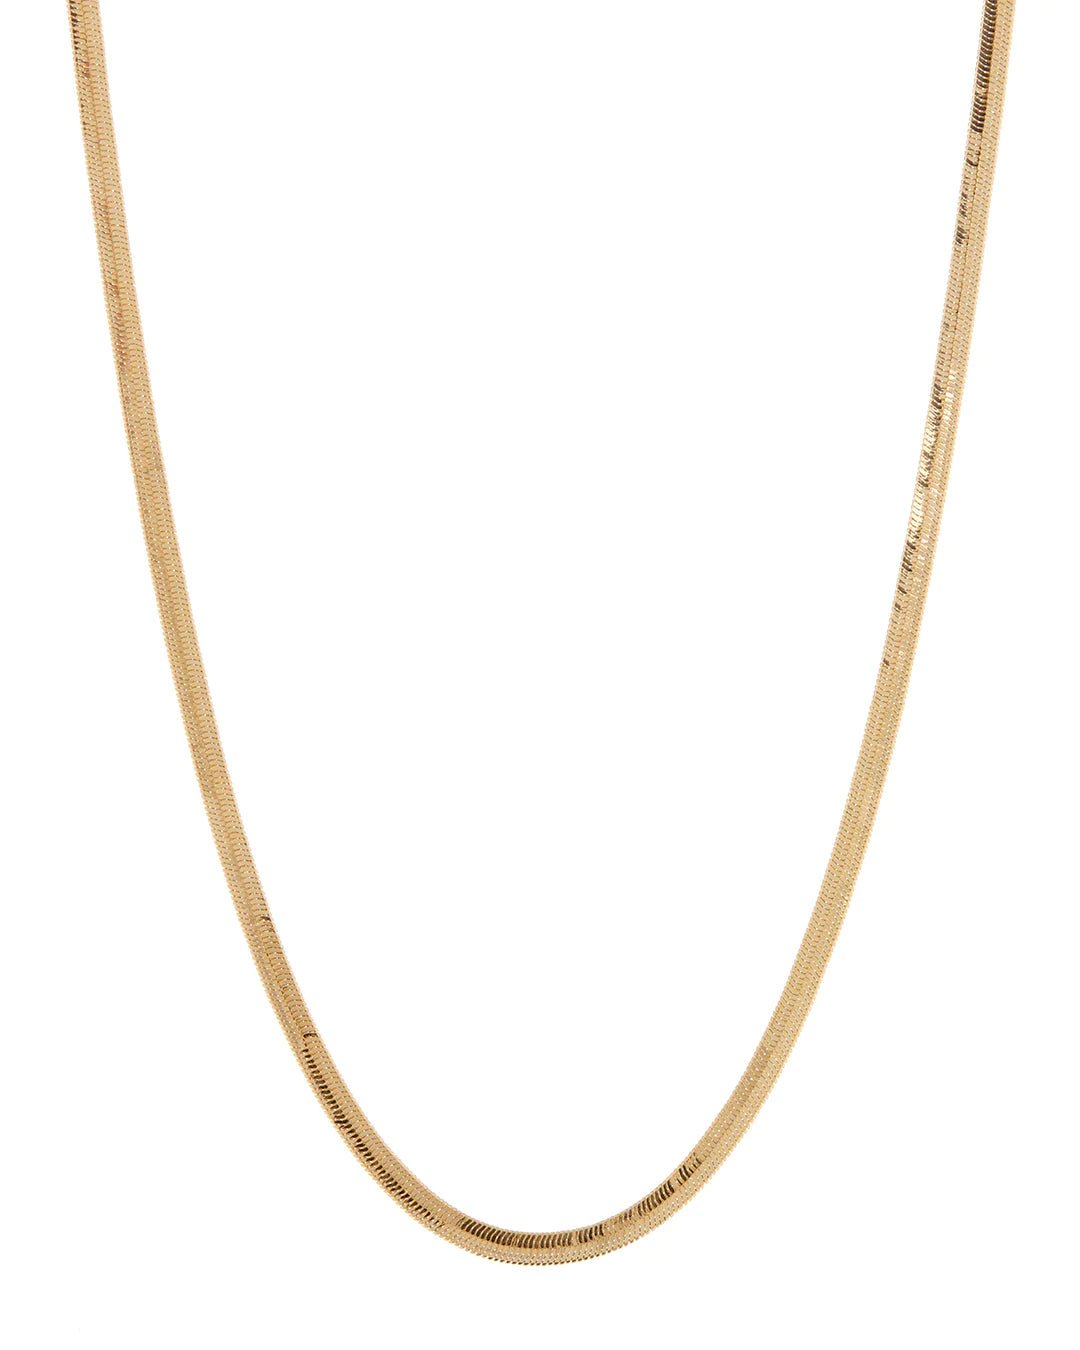 The Gold Classique Herringbone Chain - Something about Sofia